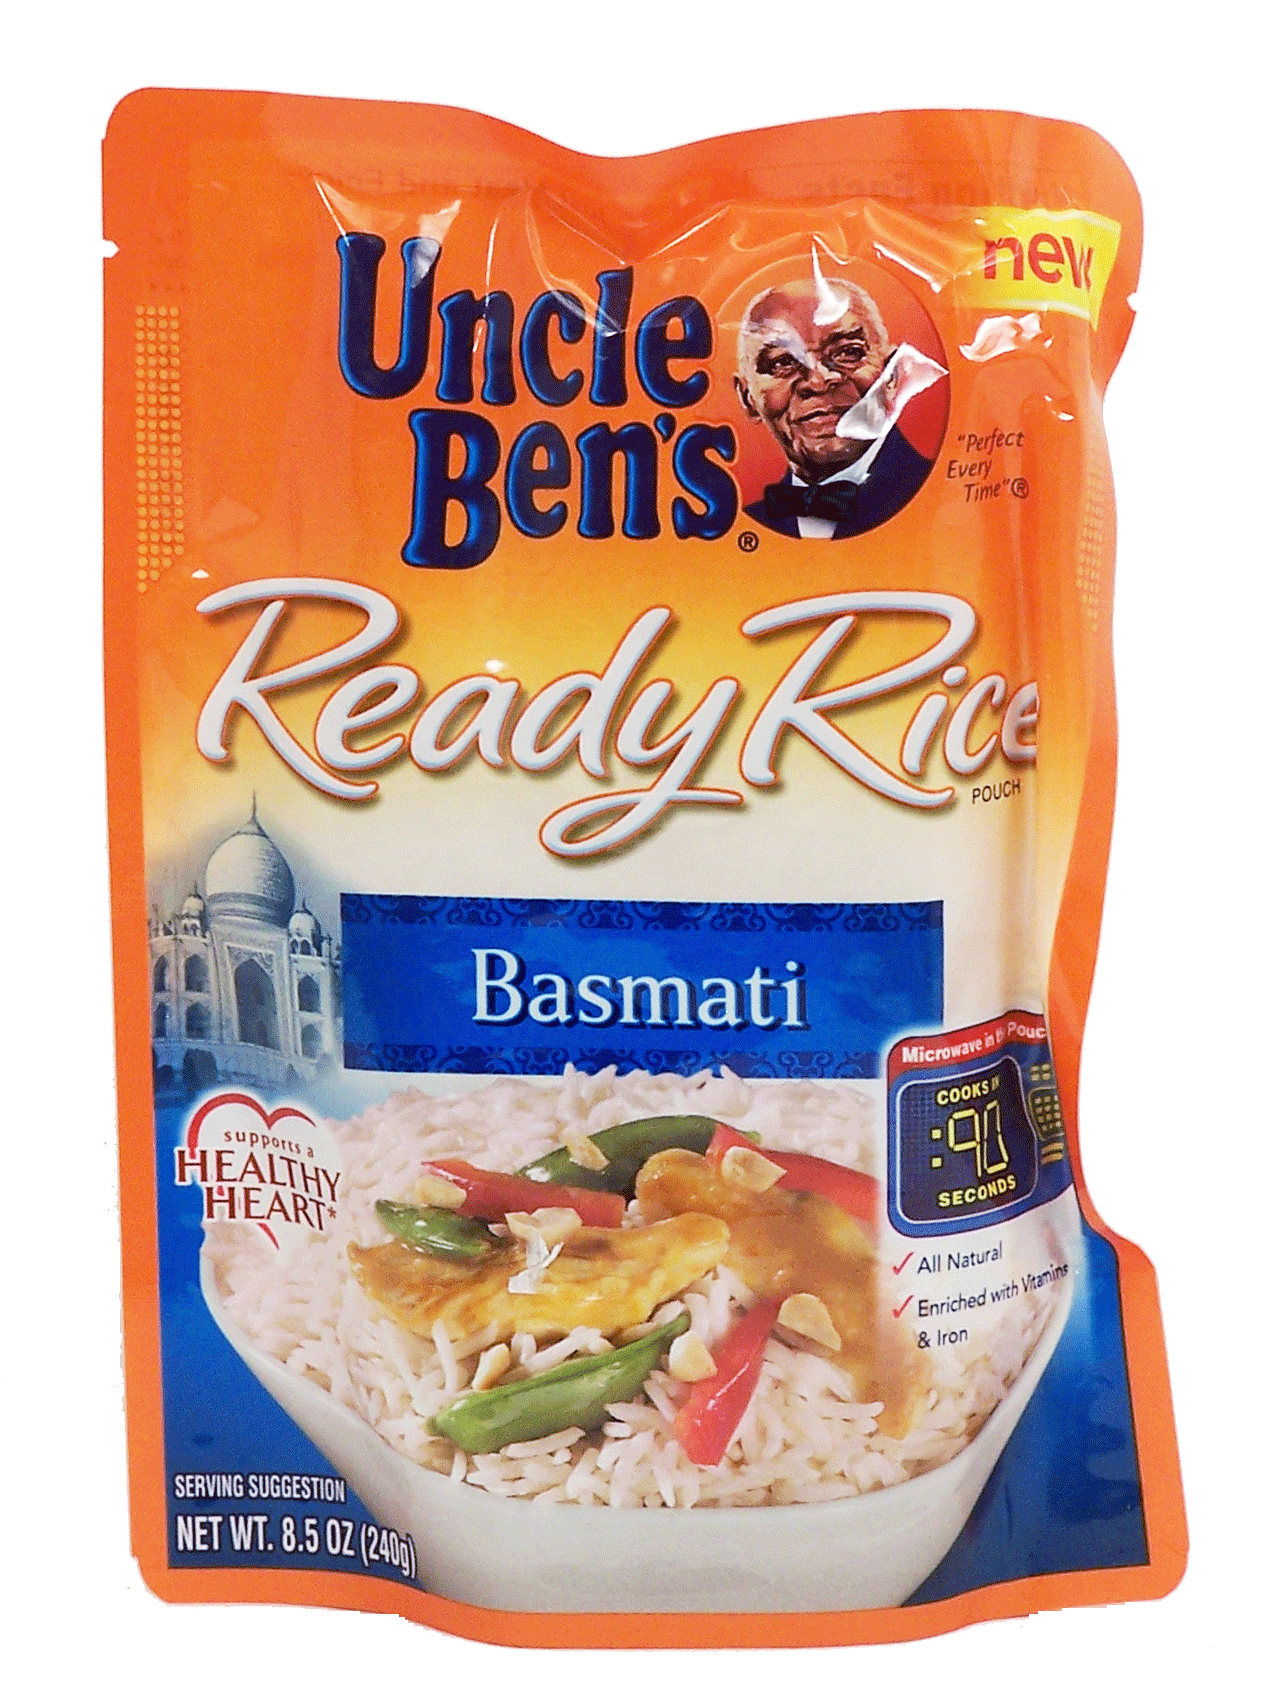 Uncle Ben's Ready Rice basmati microwave rice Full-Size Picture